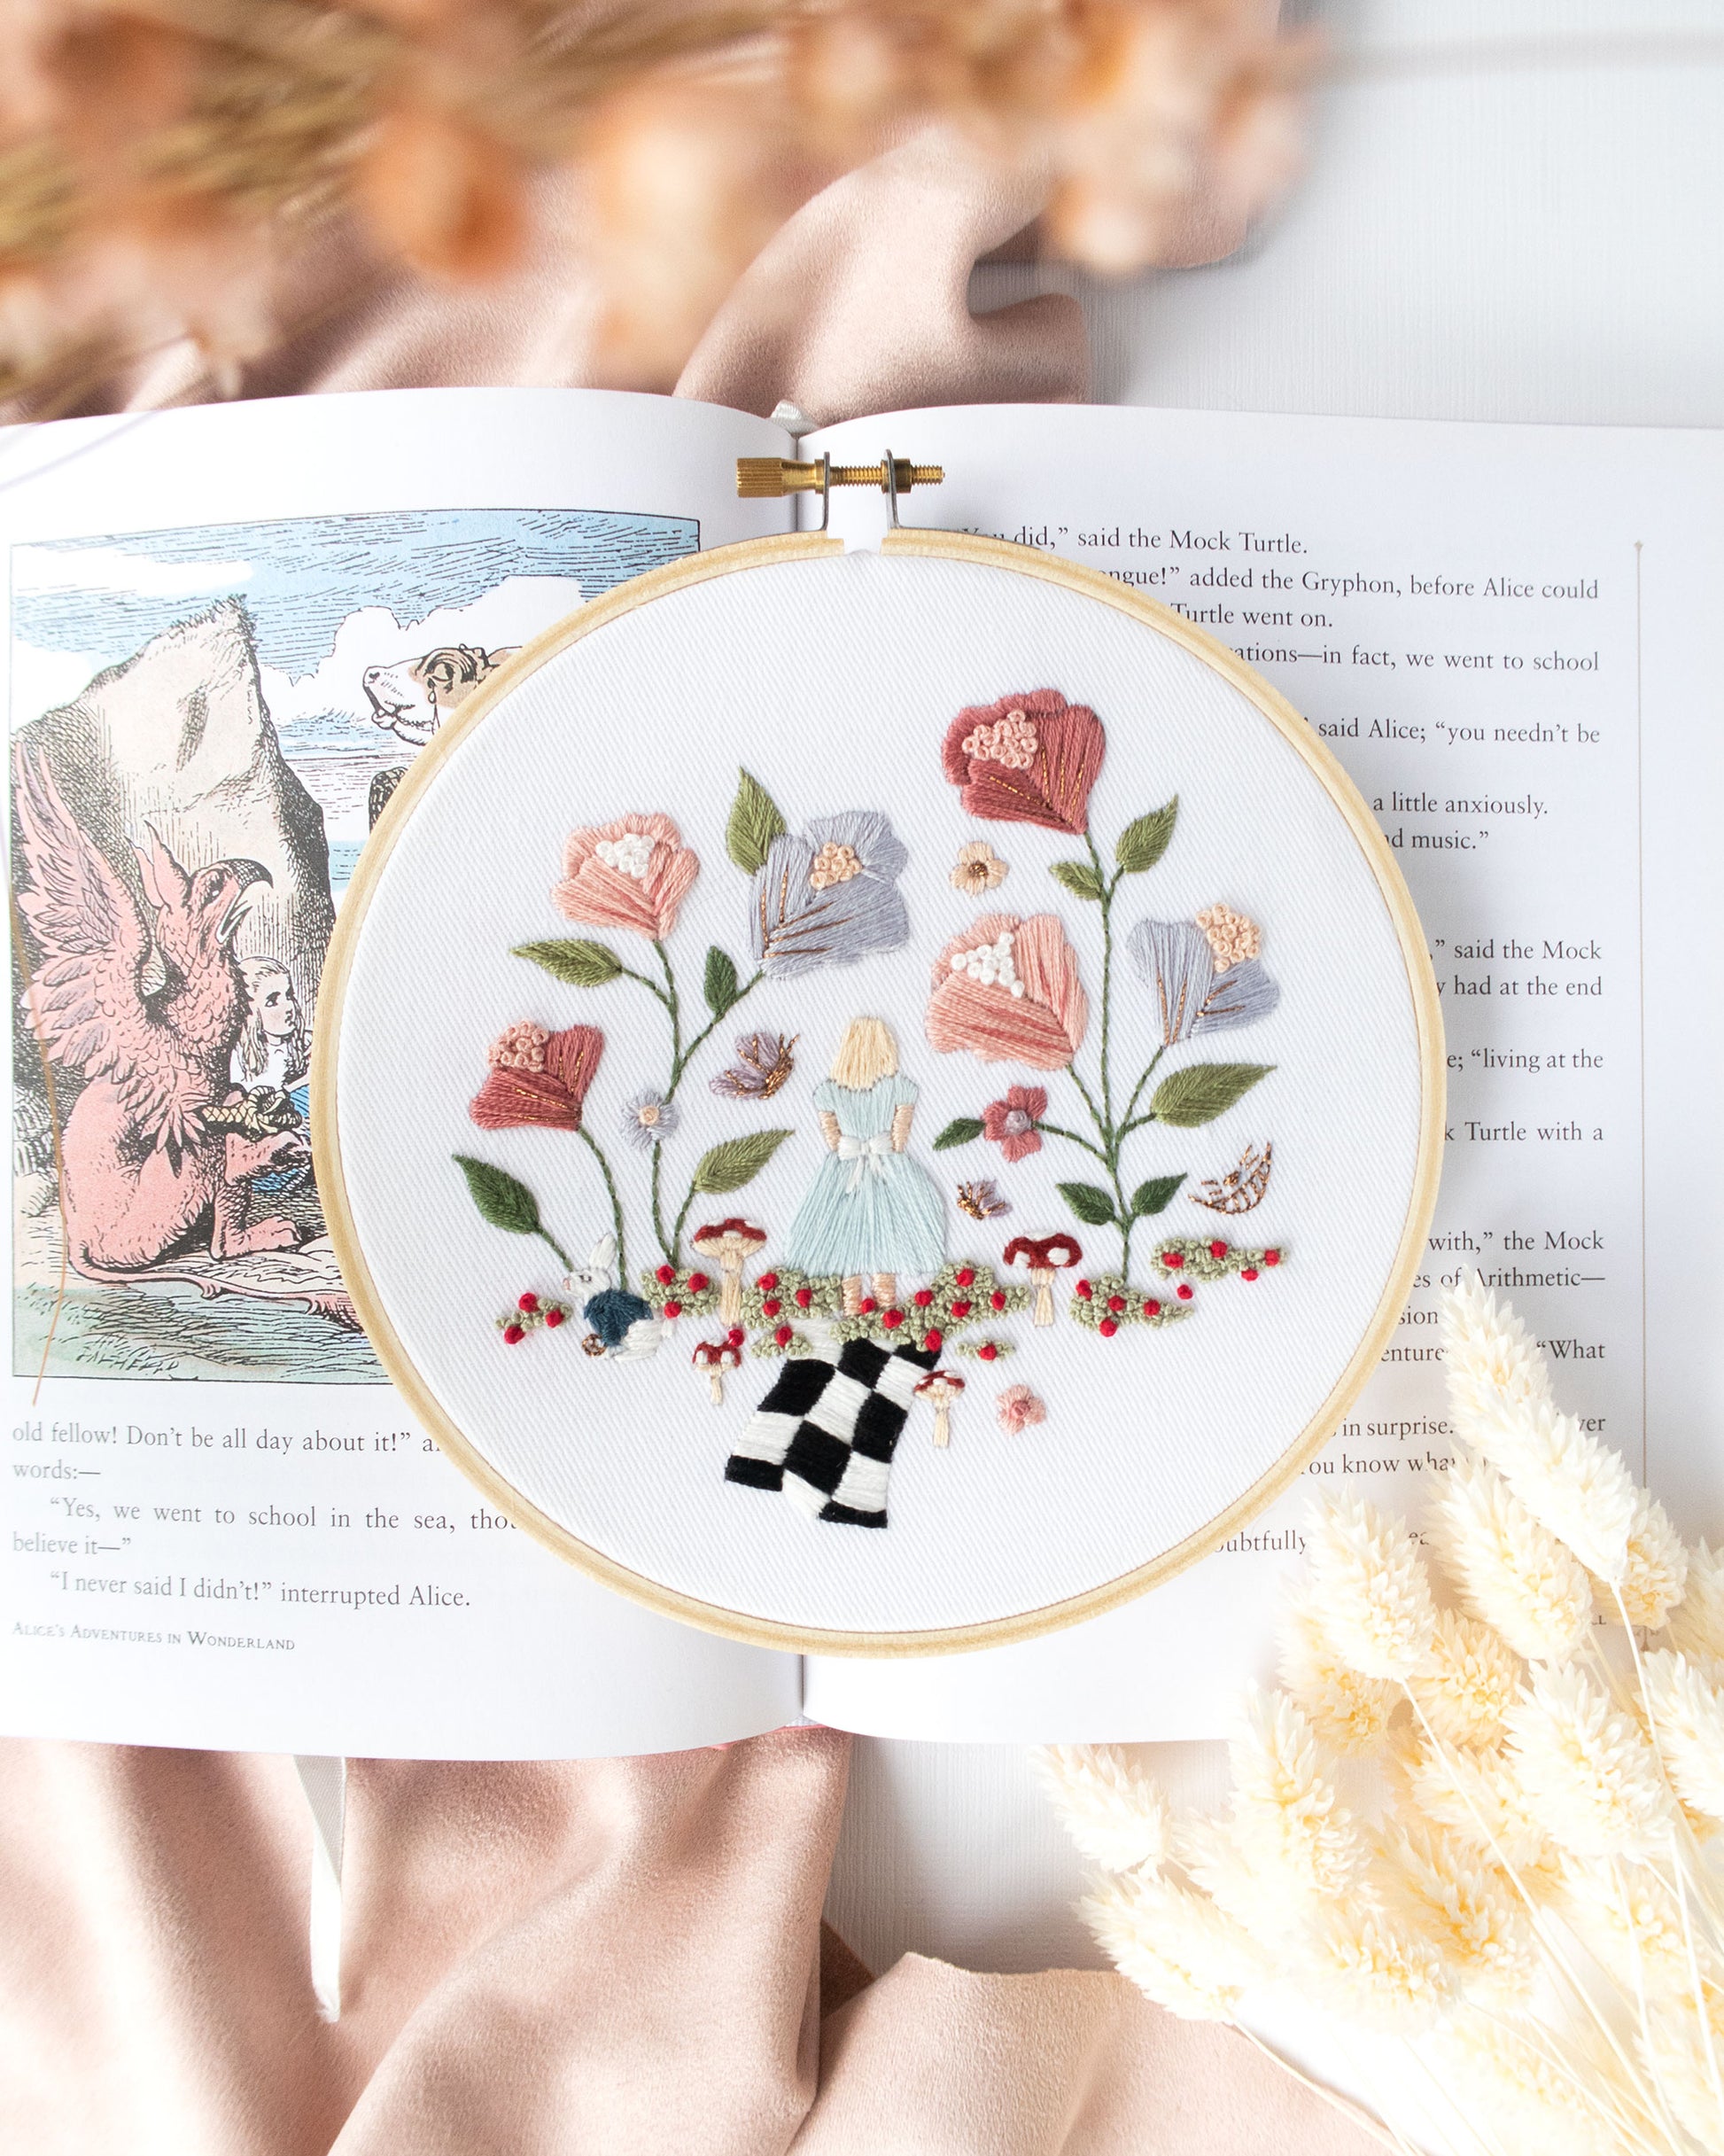 How To Transfer Your Embroidery Pattern - And Other Adventures Embroidery Co